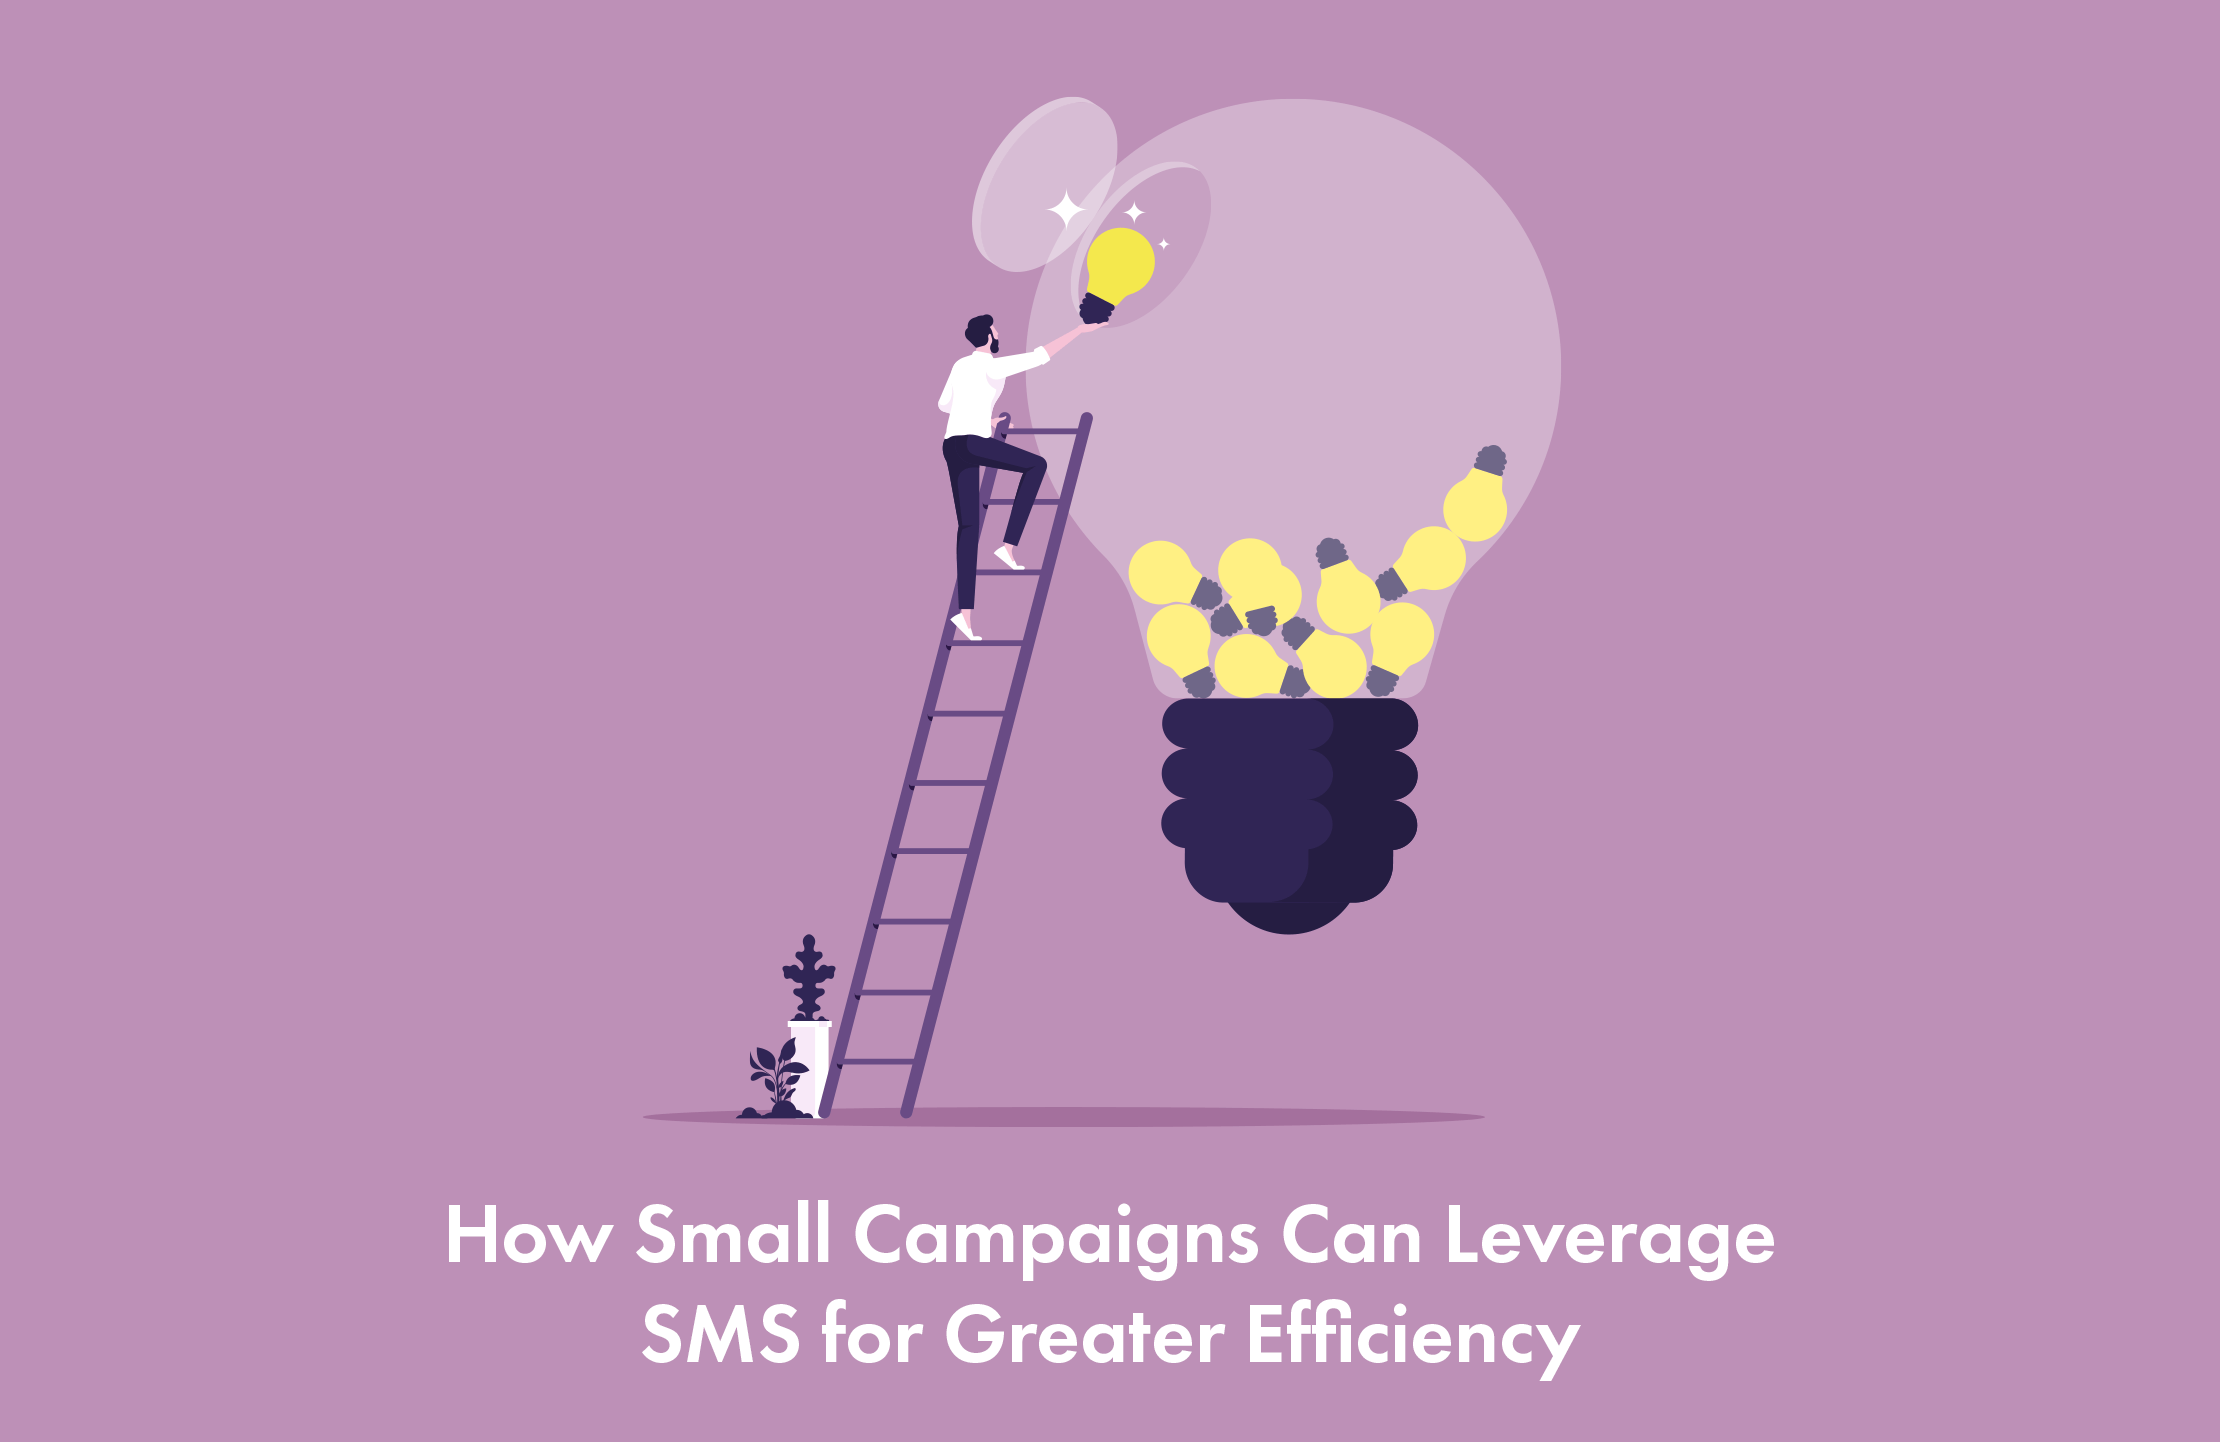 How Small Campaigns Can Leverage SMS for Greater Efficiency